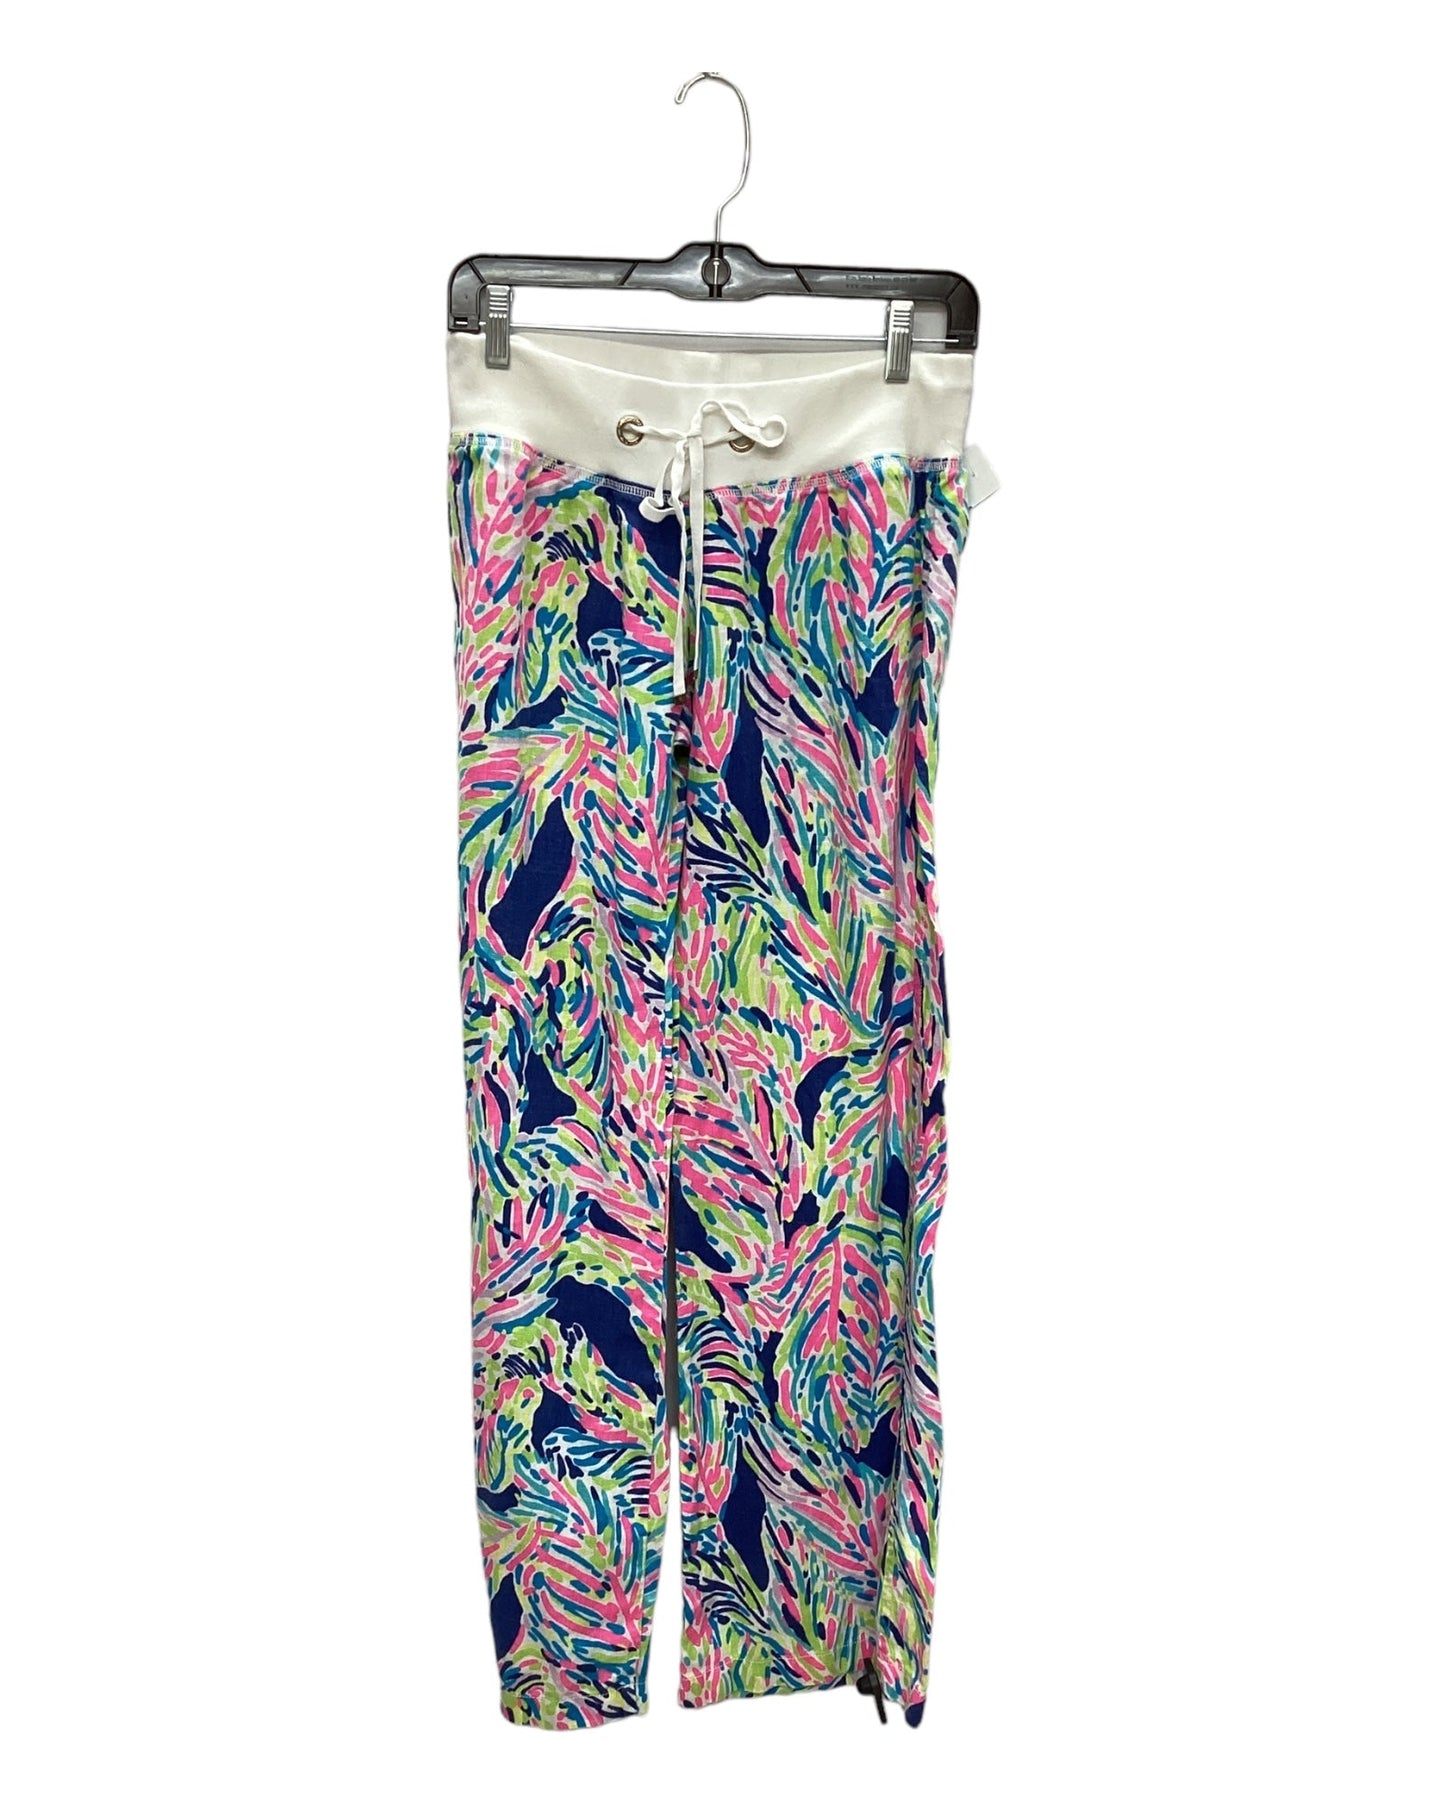 Multi-colored Pants Designer Lilly Pulitzer, Size S